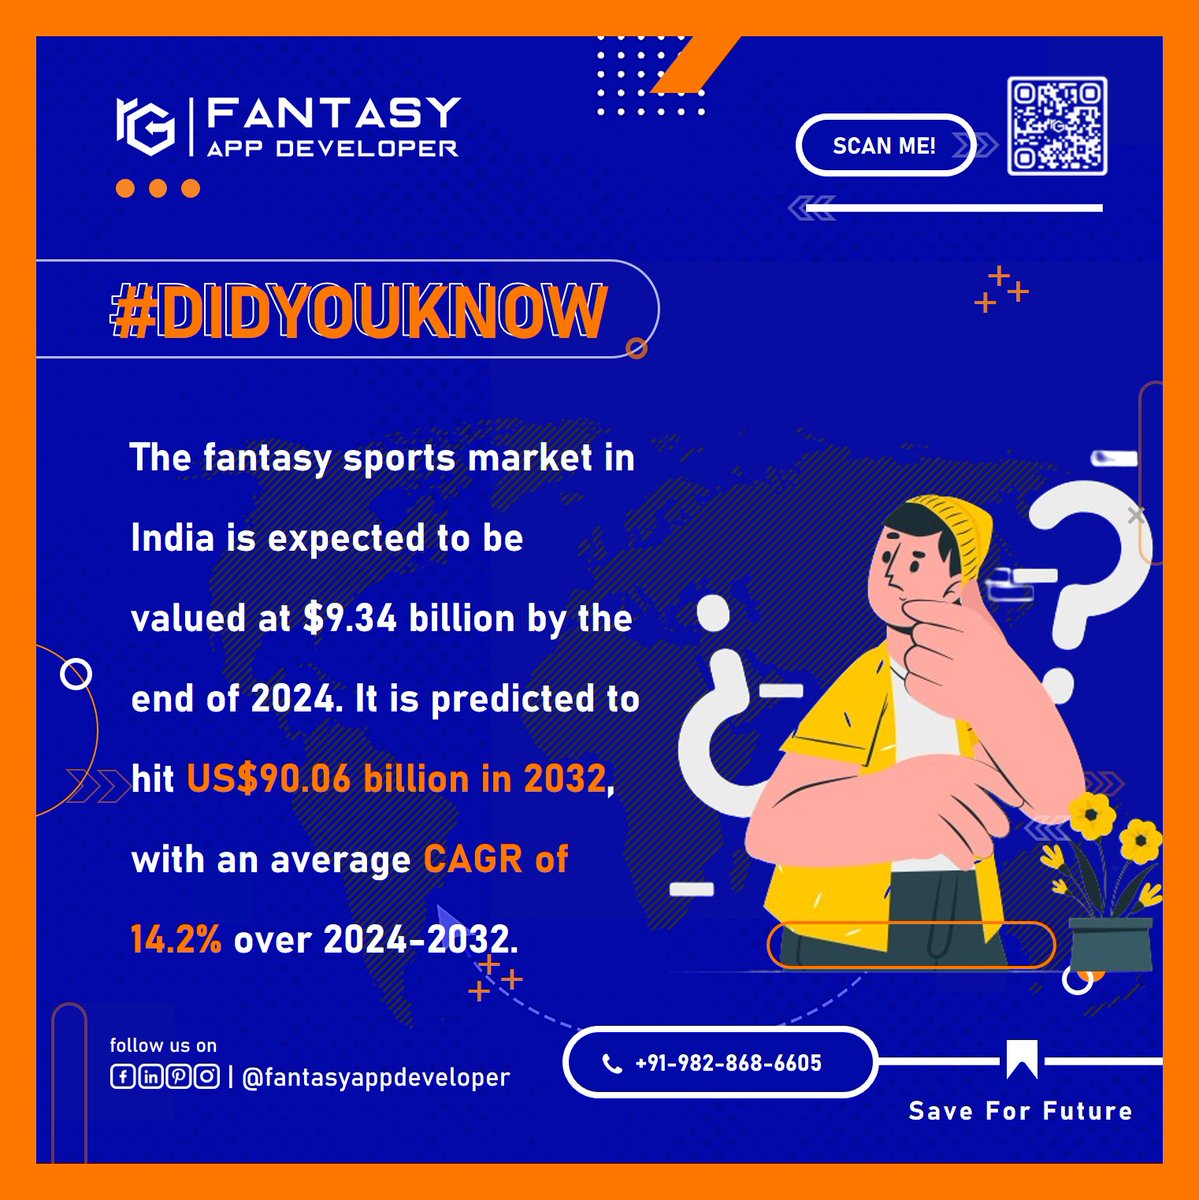 With the soaring popularity of #fantasysports, no surprise that #India's #market will reach $90.06 billion by 2032🔥🚀

For more #sports market #insights, follow @fantasyappdev👌

🌐 Visit: fantasyappdeveloper.com

#didyouknowfacts #intrestingfacts #OnTheRise #randomfact #update